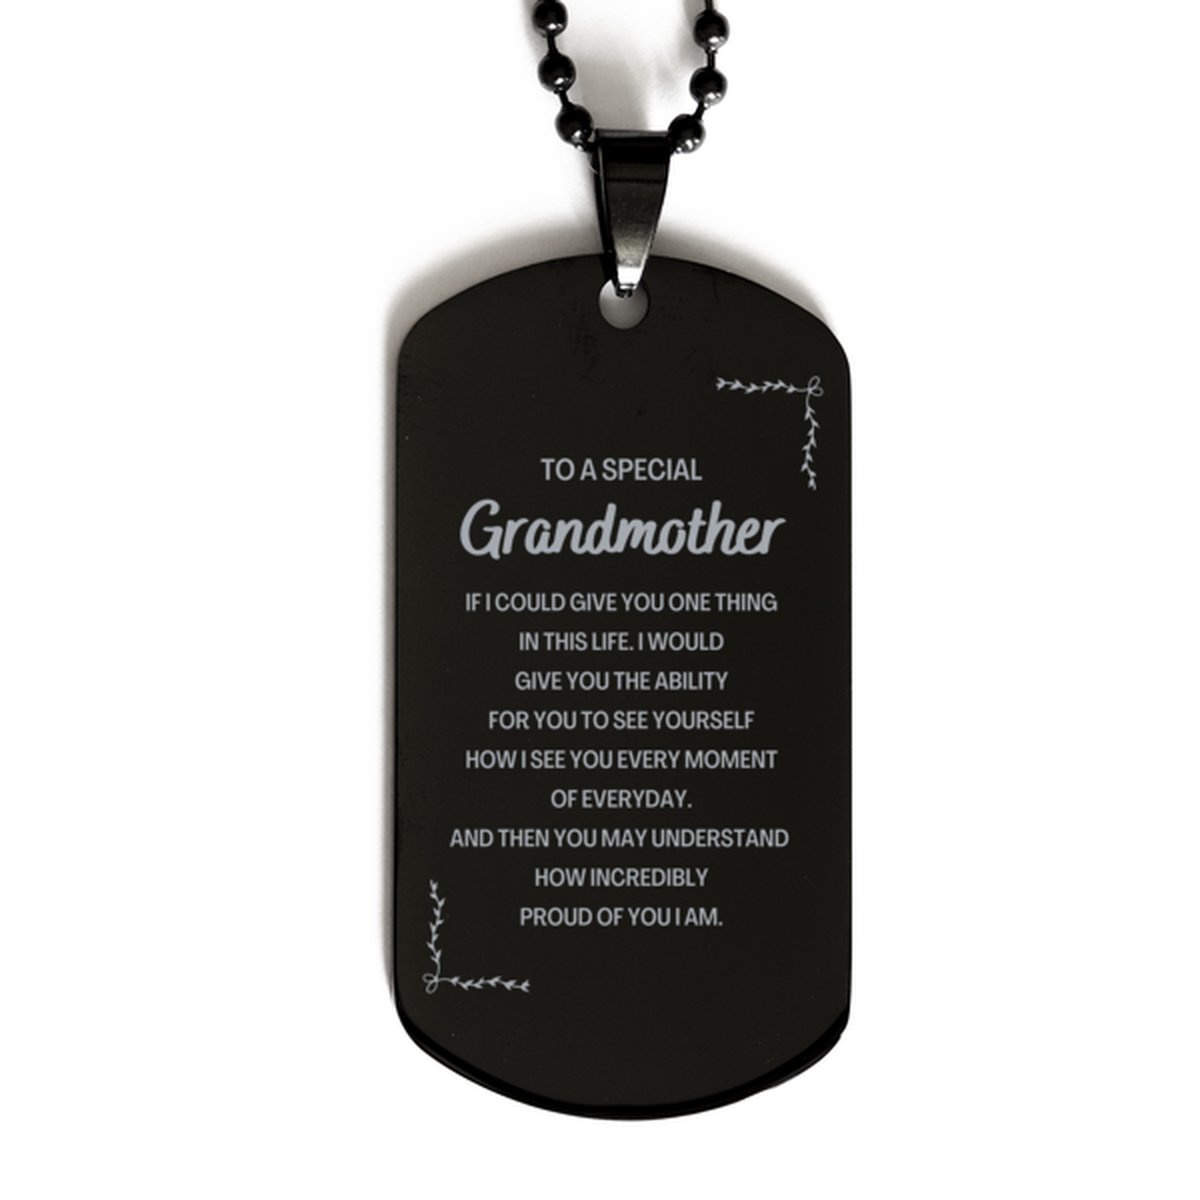 To My Grandmother Black Dog Tag, Gifts For Grandmother Engraved, Inspirational Gifts for Christmas Birthday, Epic Gifts for Grandmother To A Special Grandmother how incredibly proud of you I am